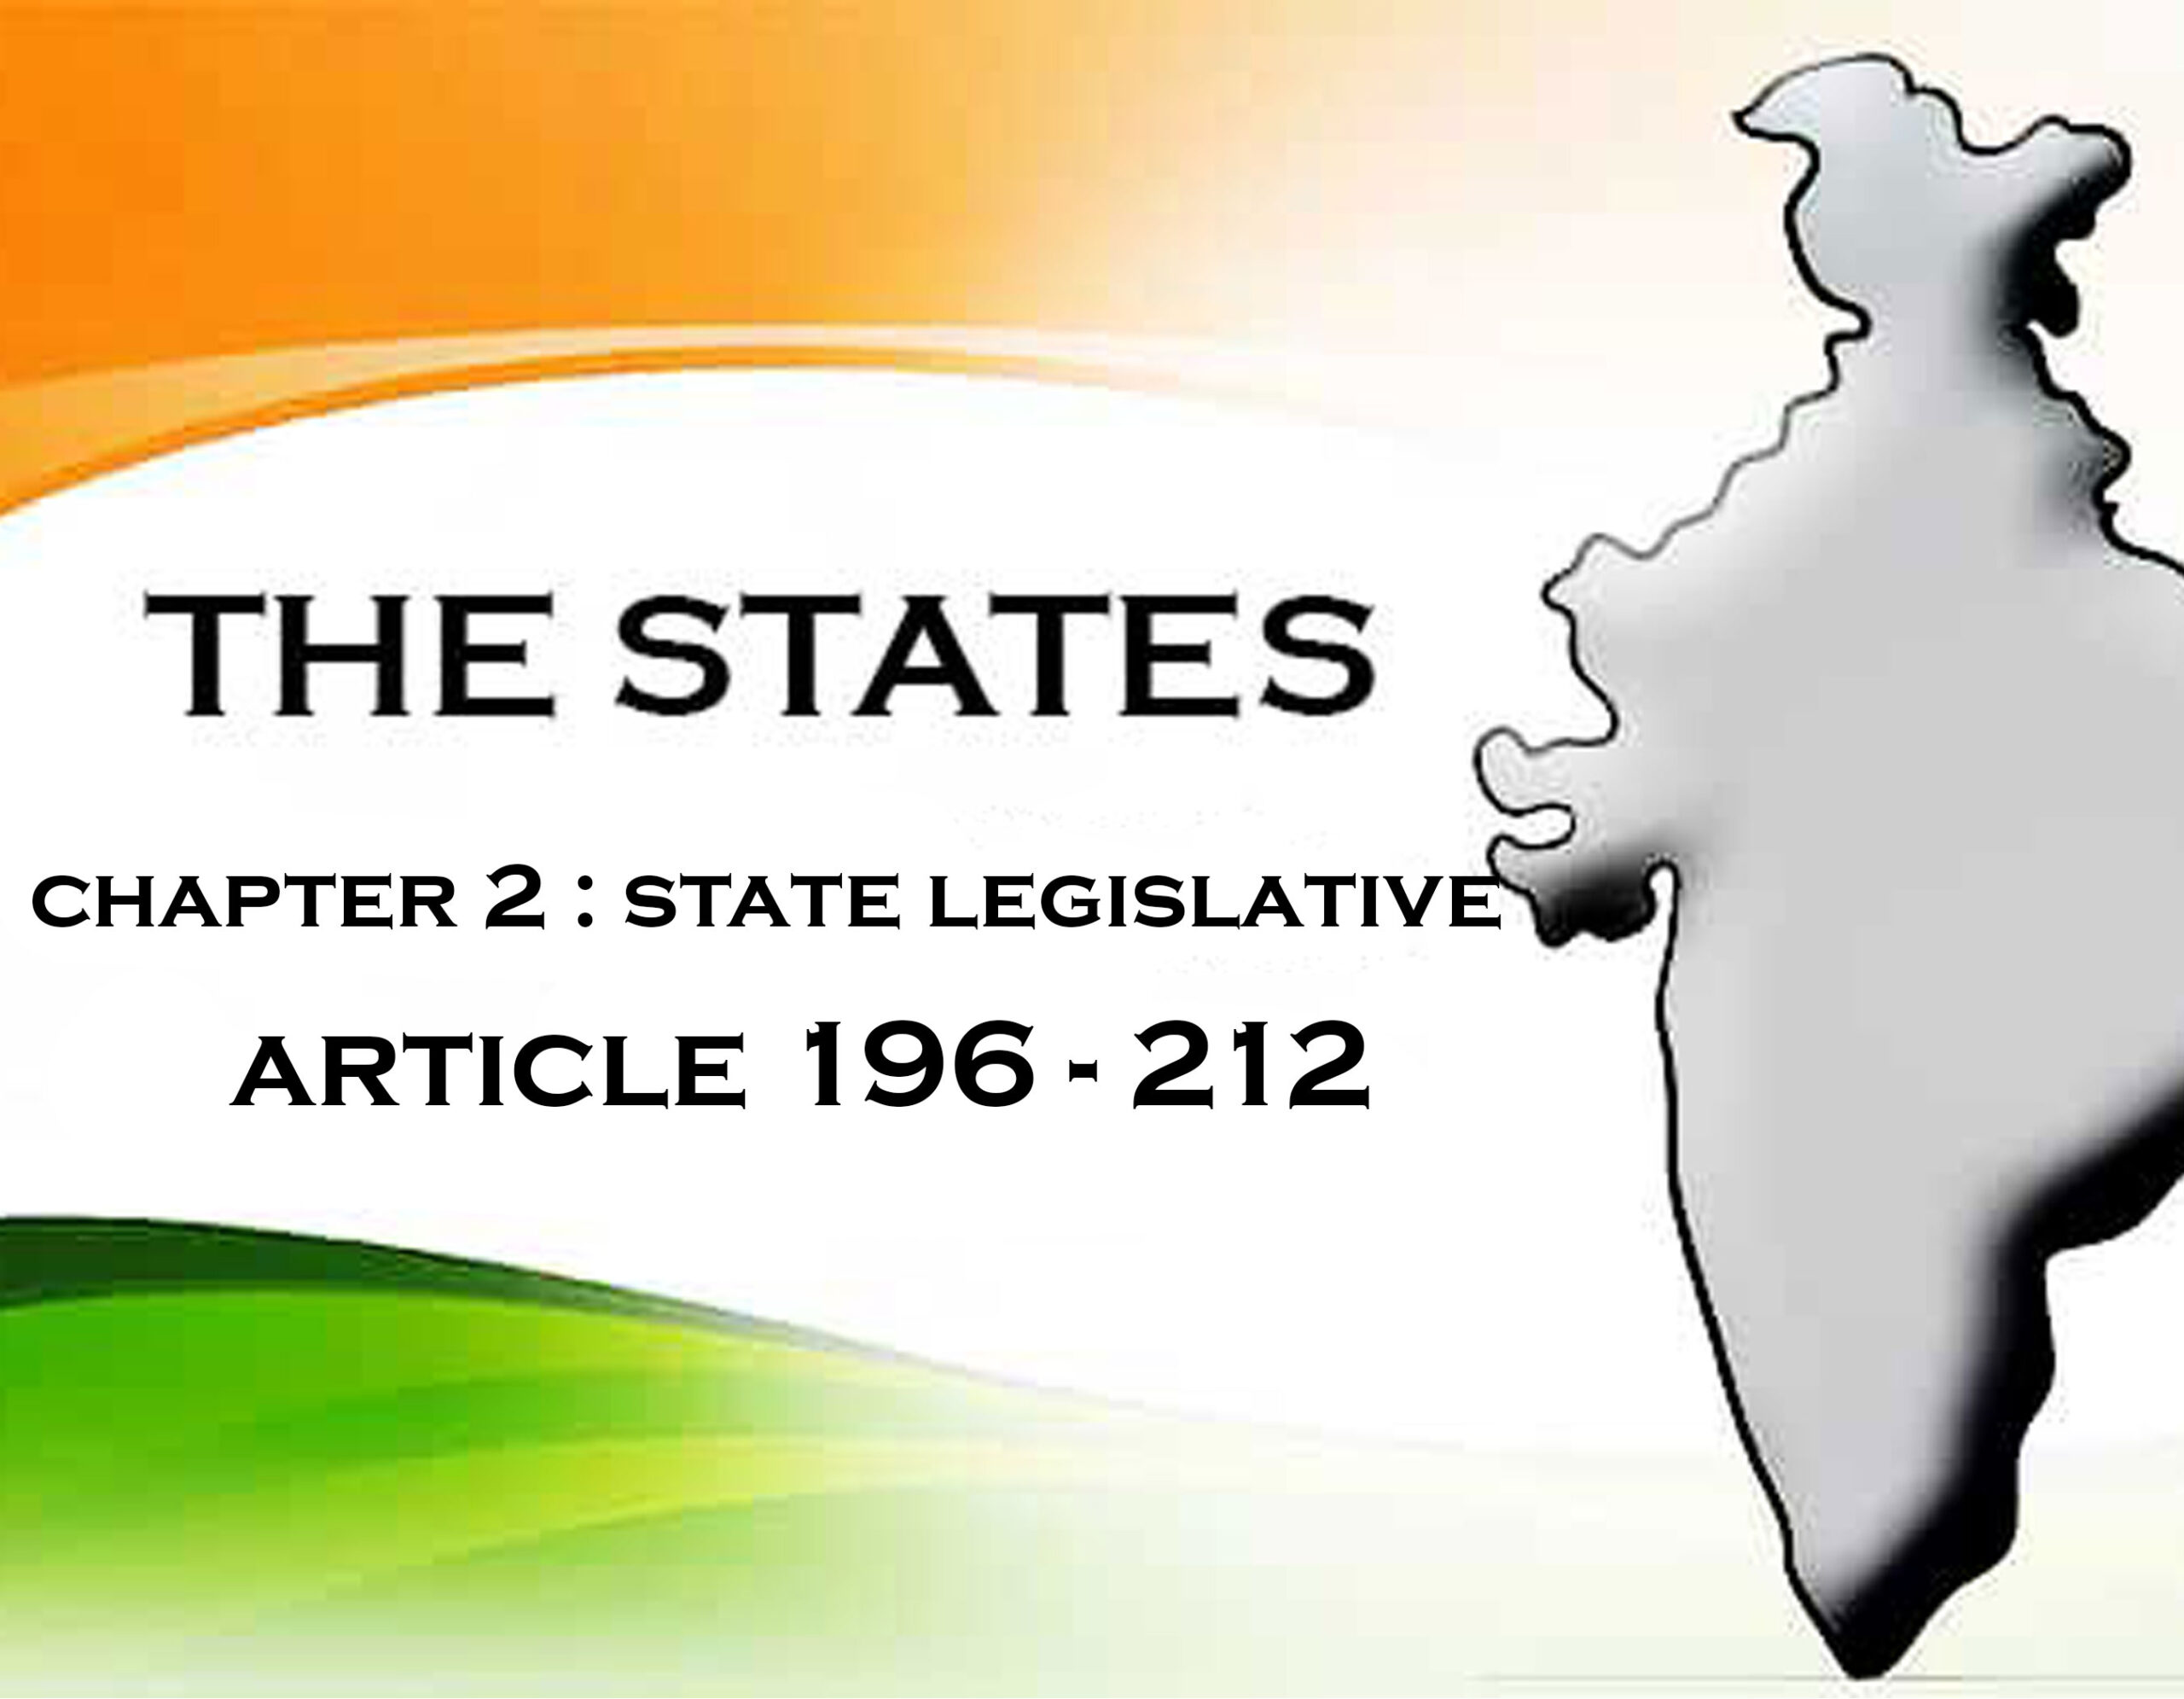 Chapter 2 : The State Legislature Article (196 – 212)